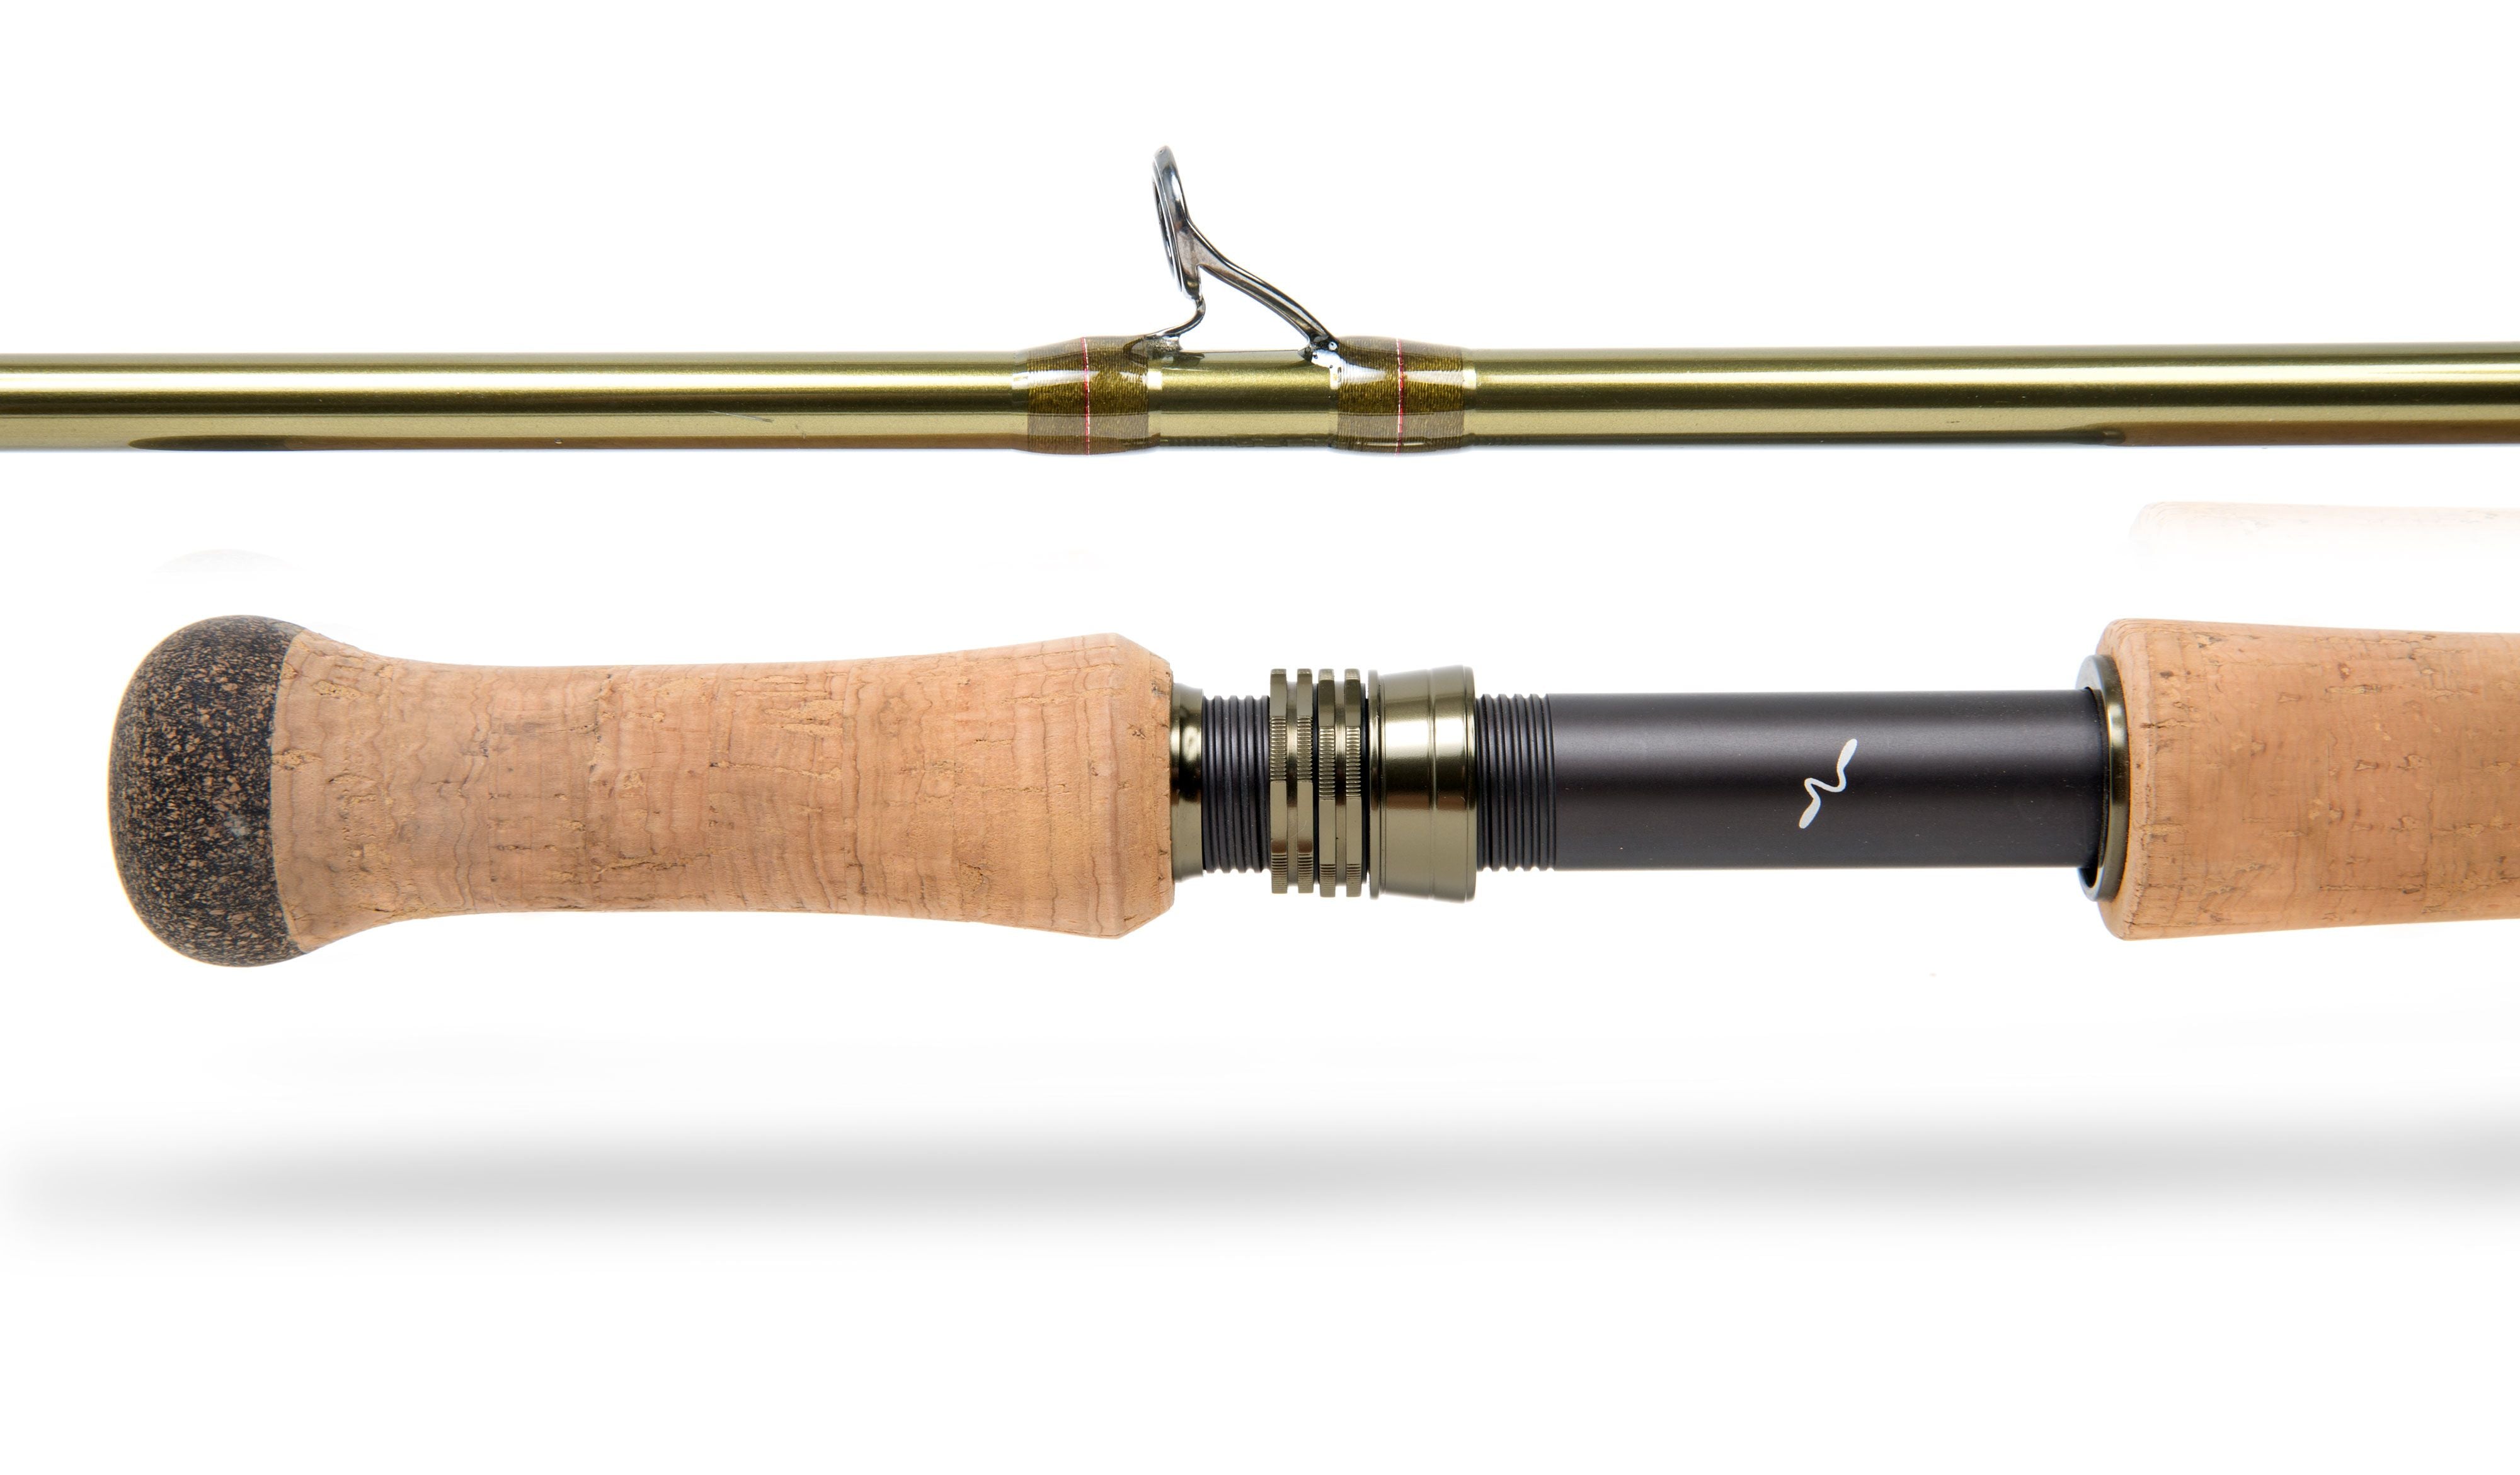 GUIDELINE STOKED DH 4PC FLY RODS